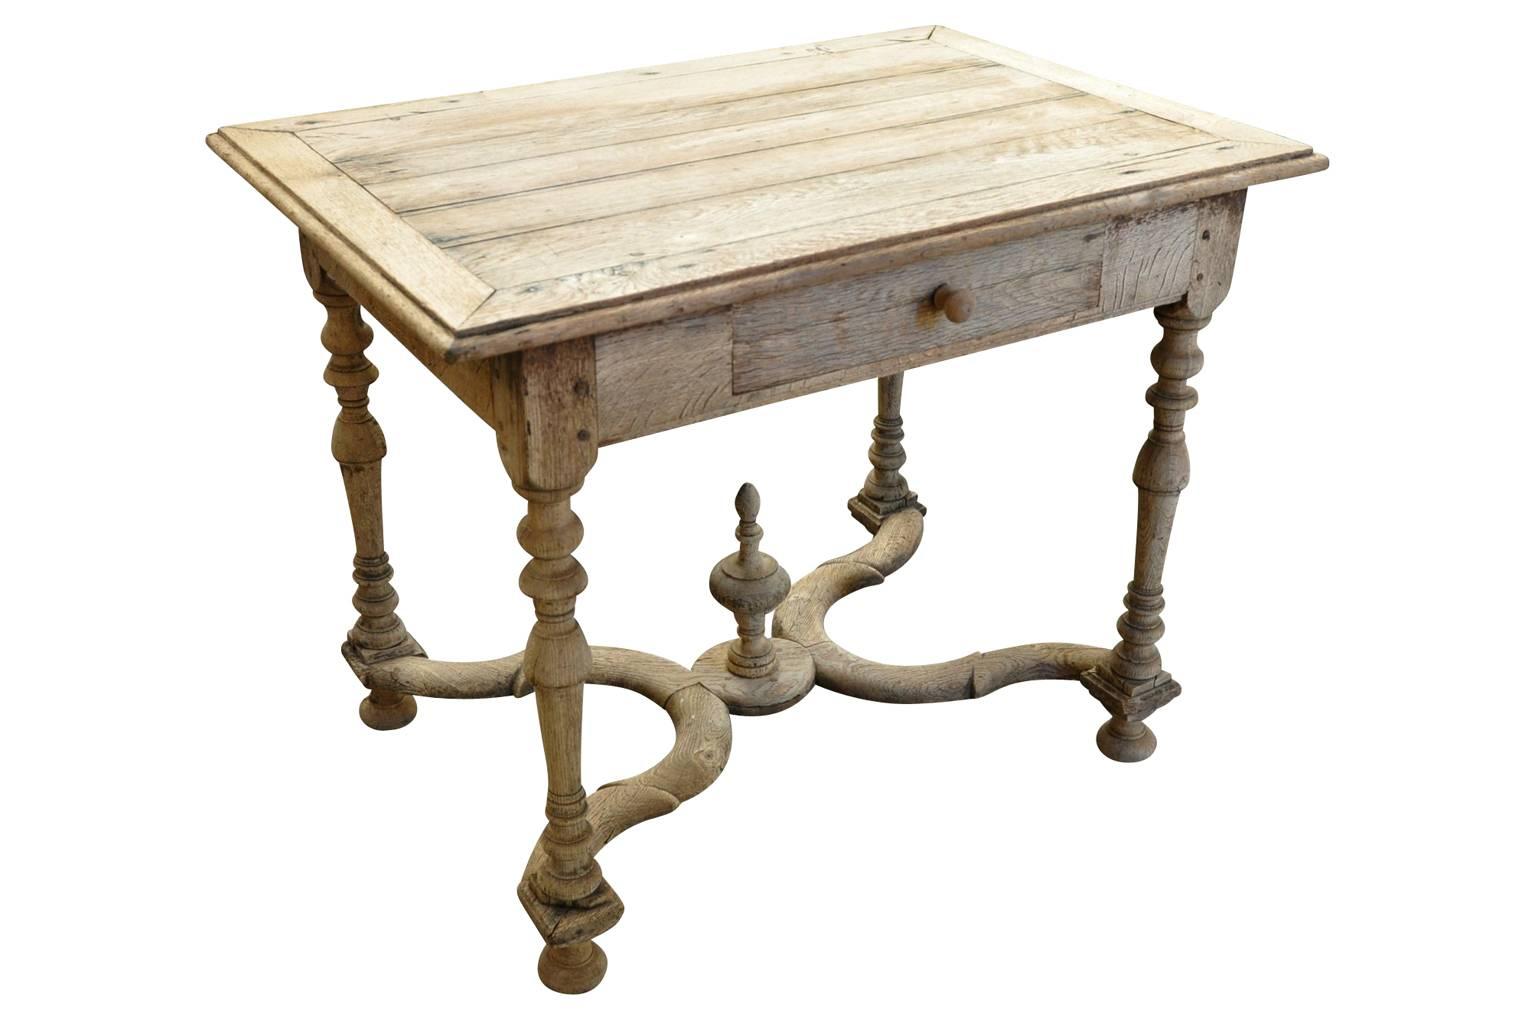 A very charming mid-19th century French Louis XIII style writing table - side table. Beautifully constructed in washed or bleached oak - this piece serves wonderfully as a bedside table as well.